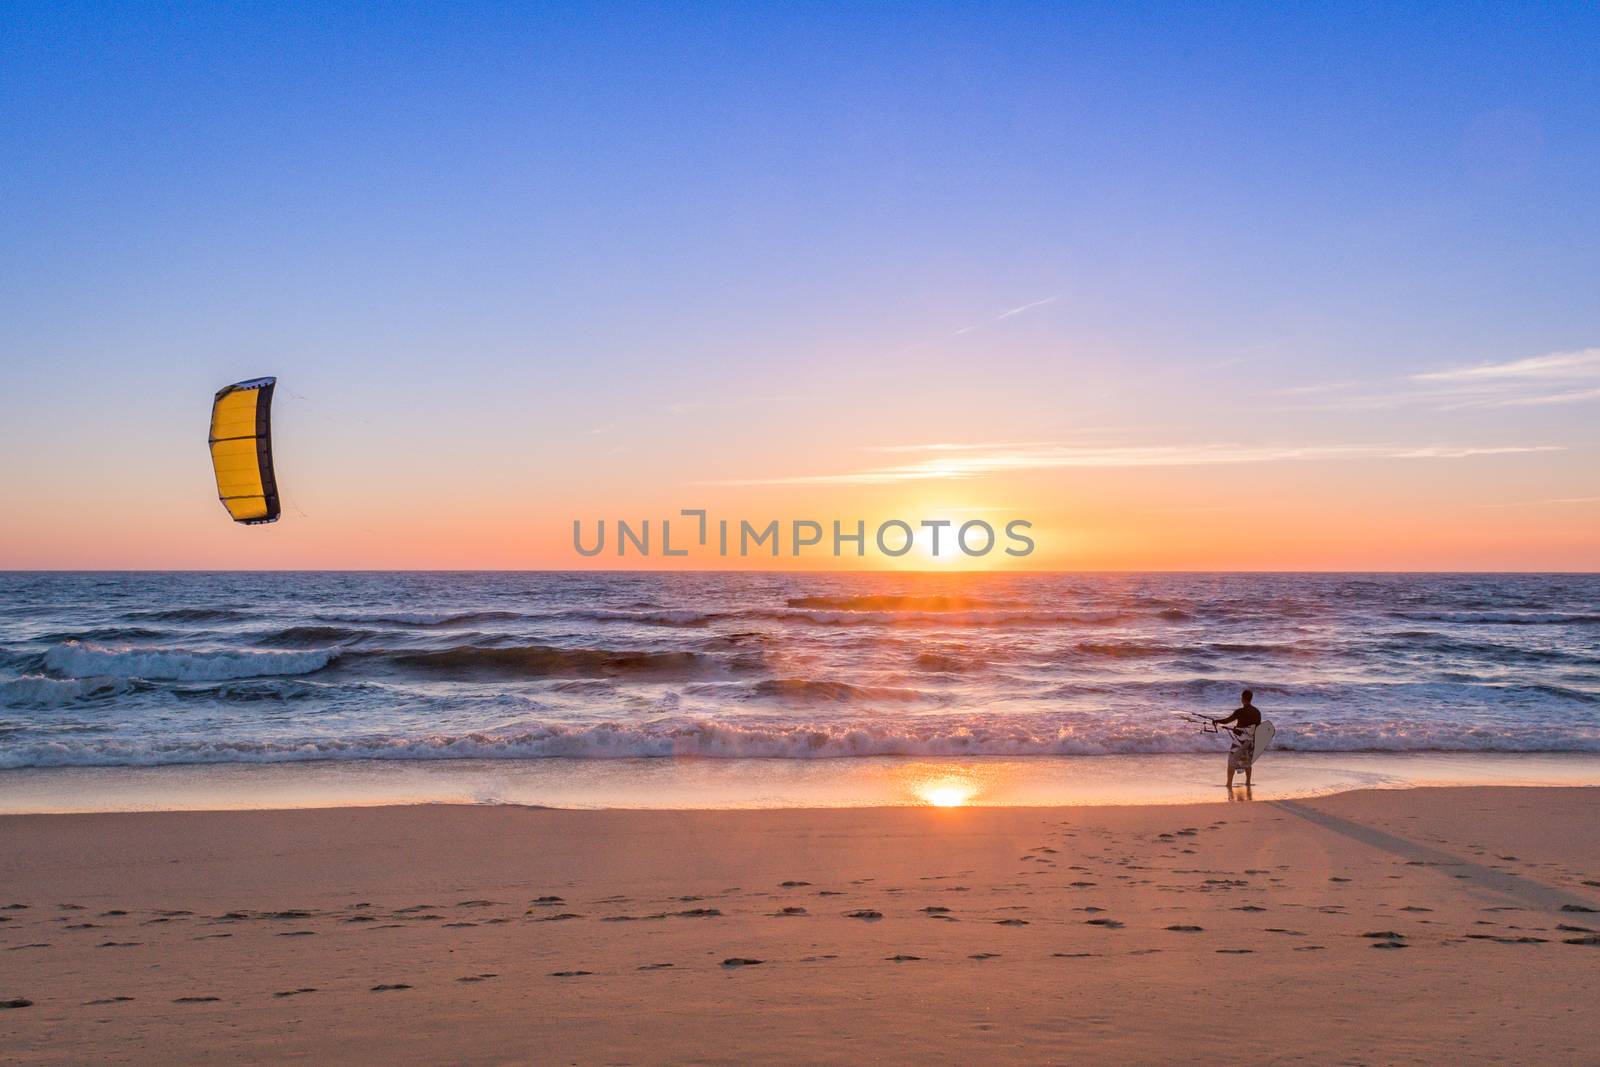 Kite surfer watching the waves at sunset in Portugal.